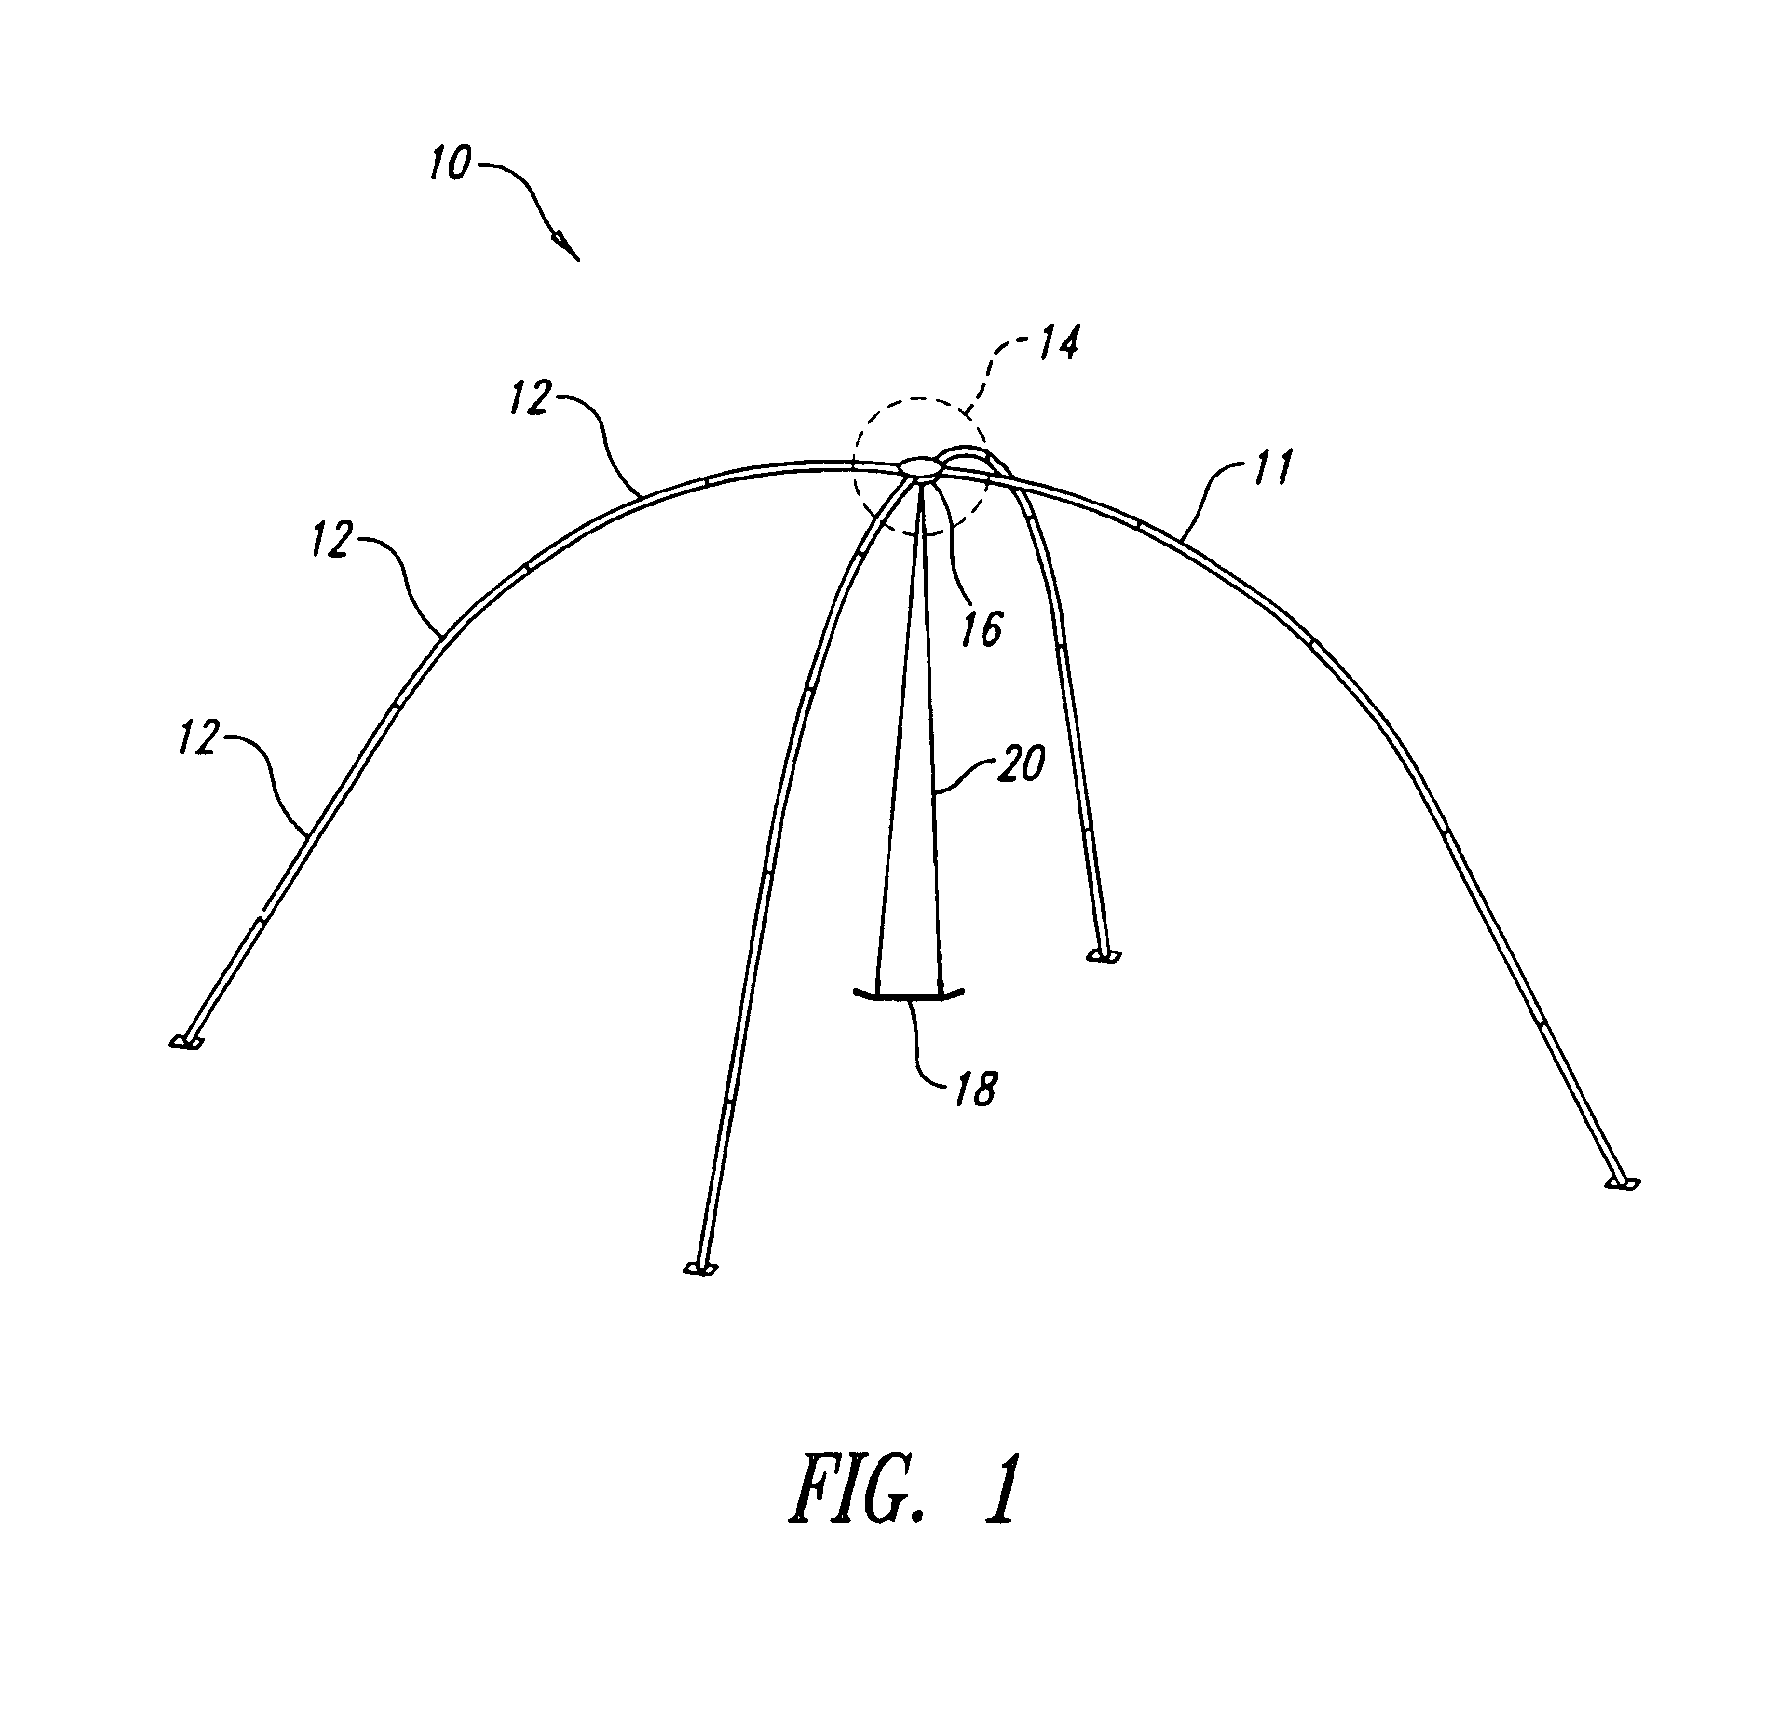 Devices, systems and methods for performing and practicing aerial maneuvers